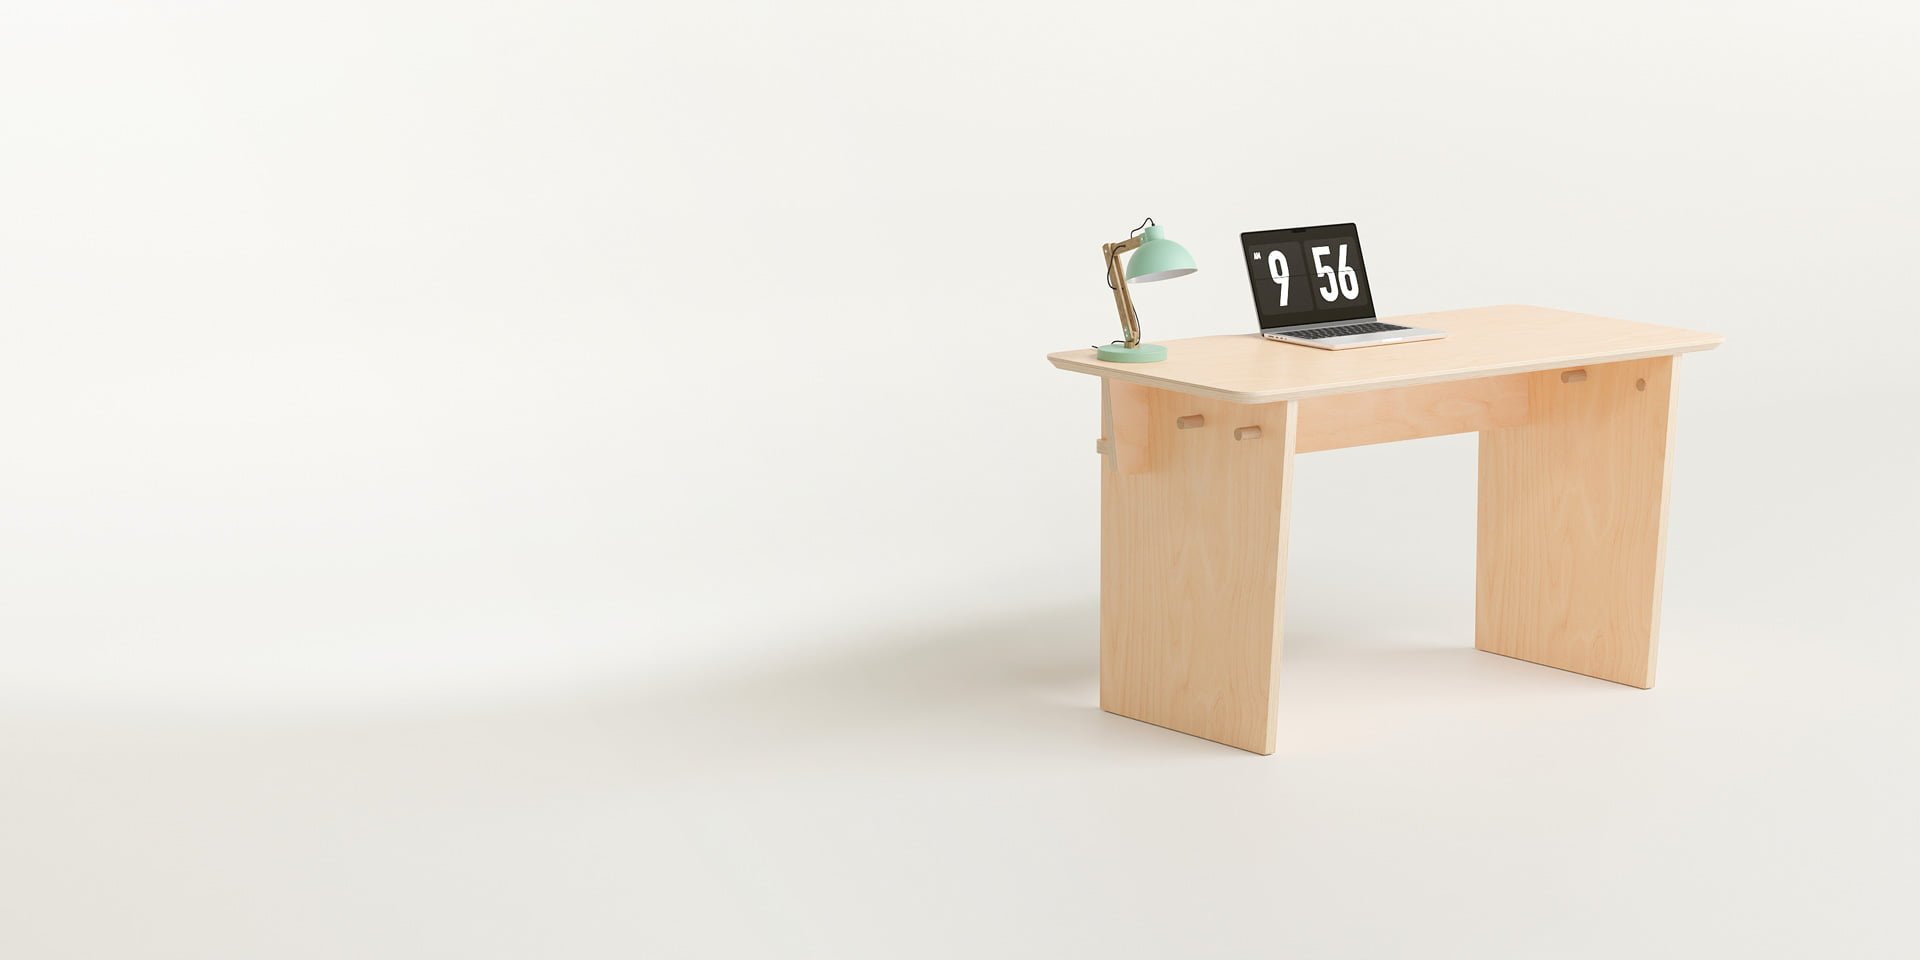 The Ecosium Stubby desk made from sustainable timber in Australia sitting on a white background with a green desk lamp and an Apple laptop